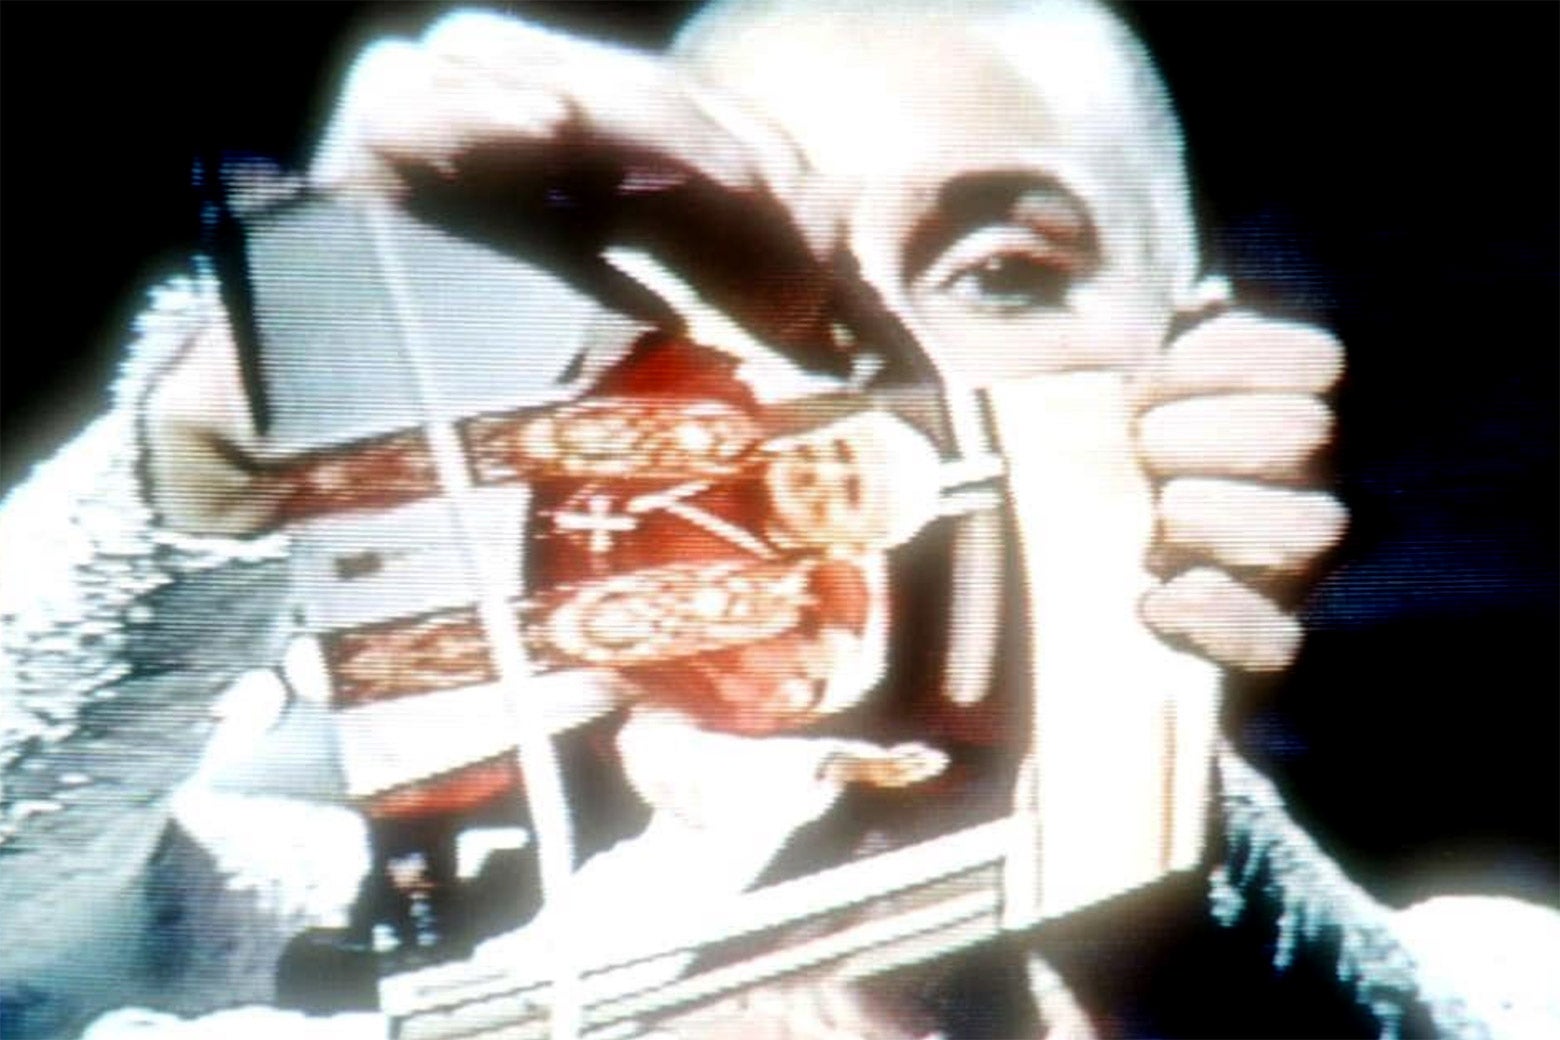 A woman with a shaved head rips up a photo of Pope John Paul II.